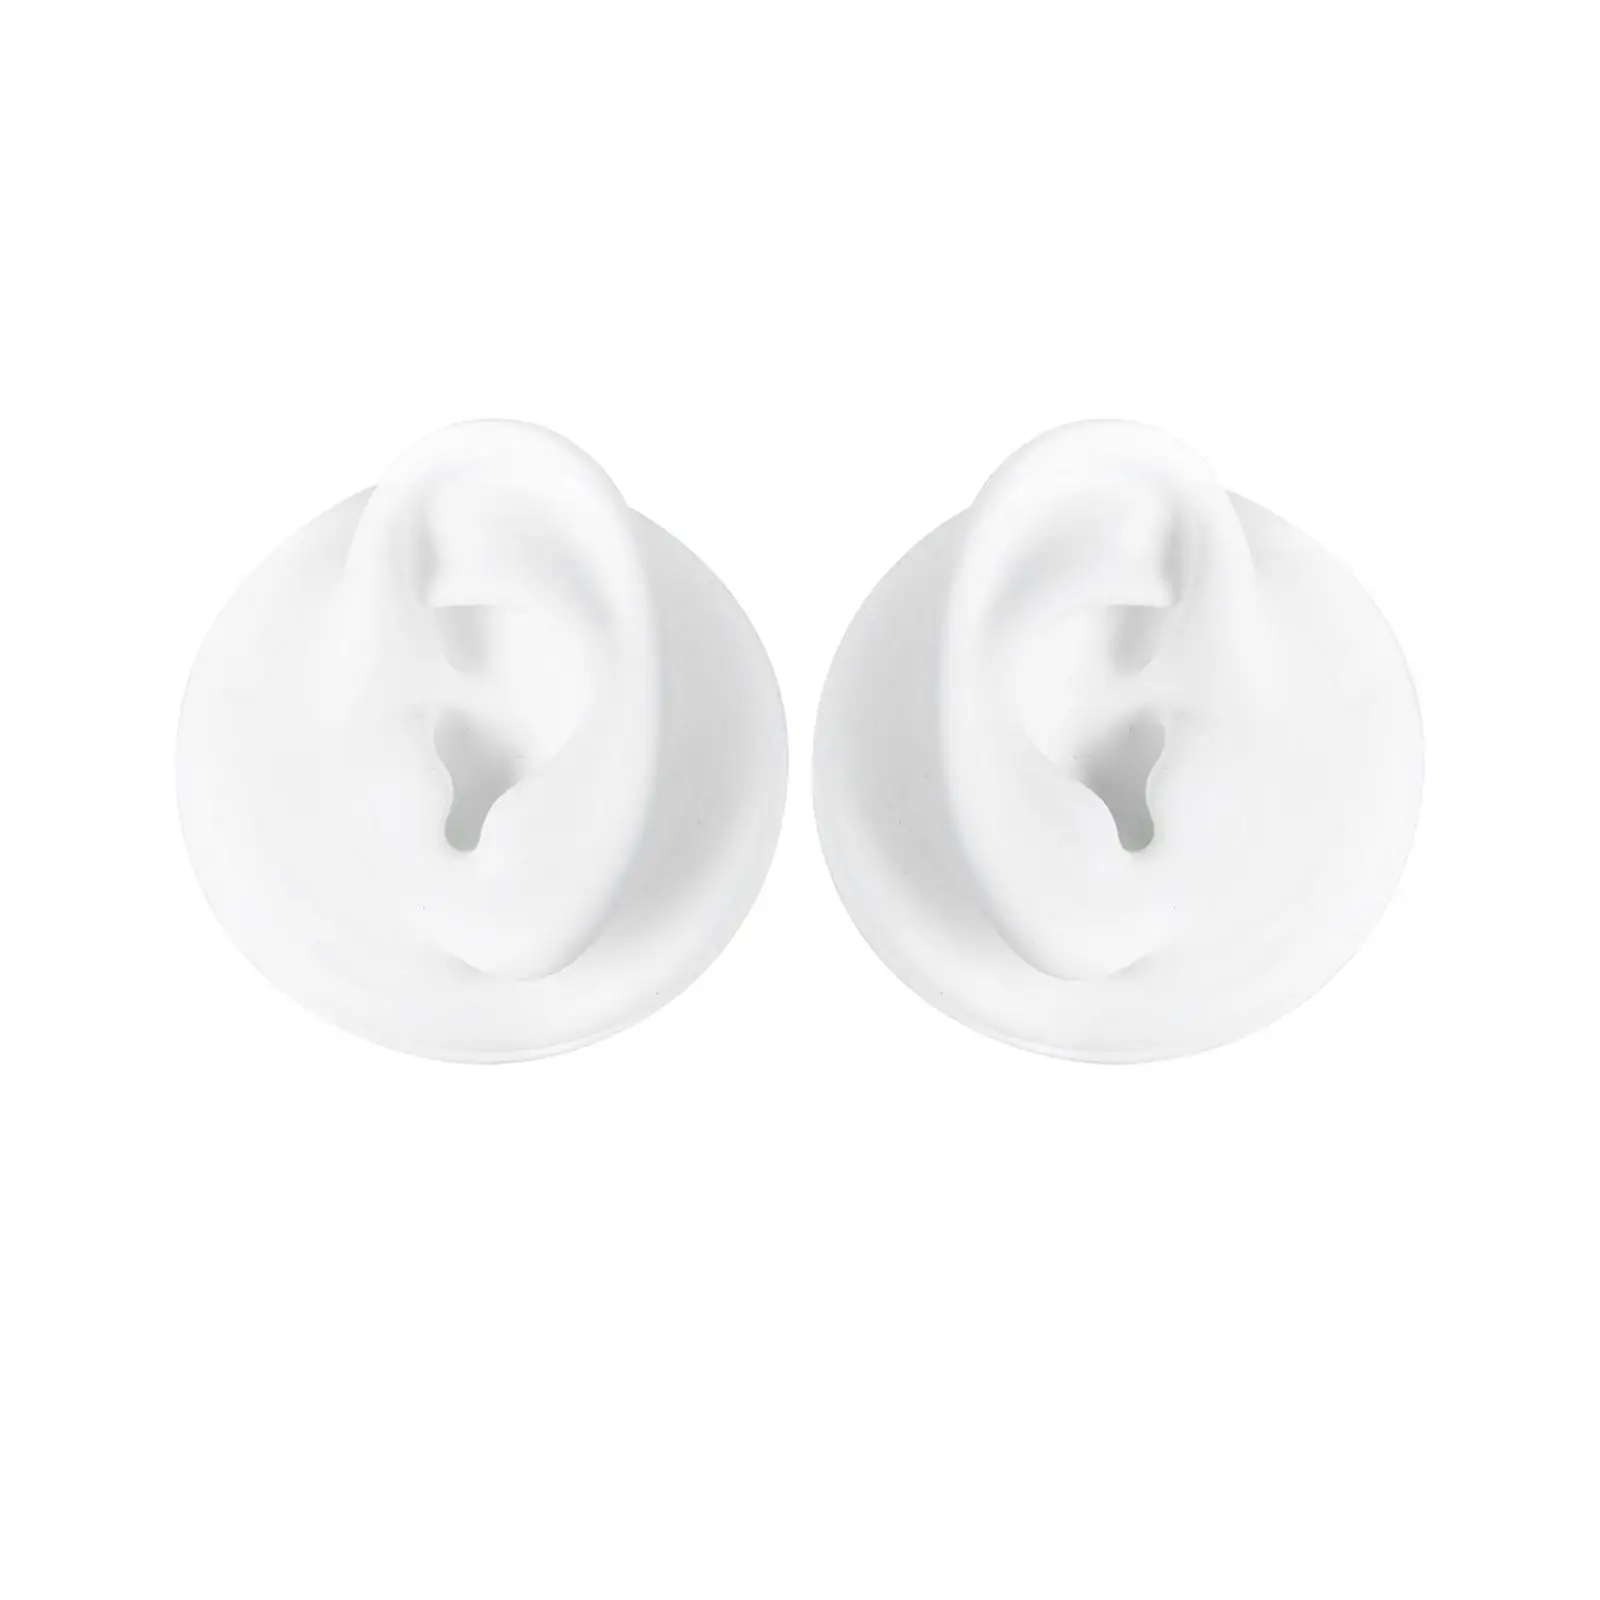 Silicone Ear Model Multipurpose Reusable for Practicing Earrings Jewelry Display